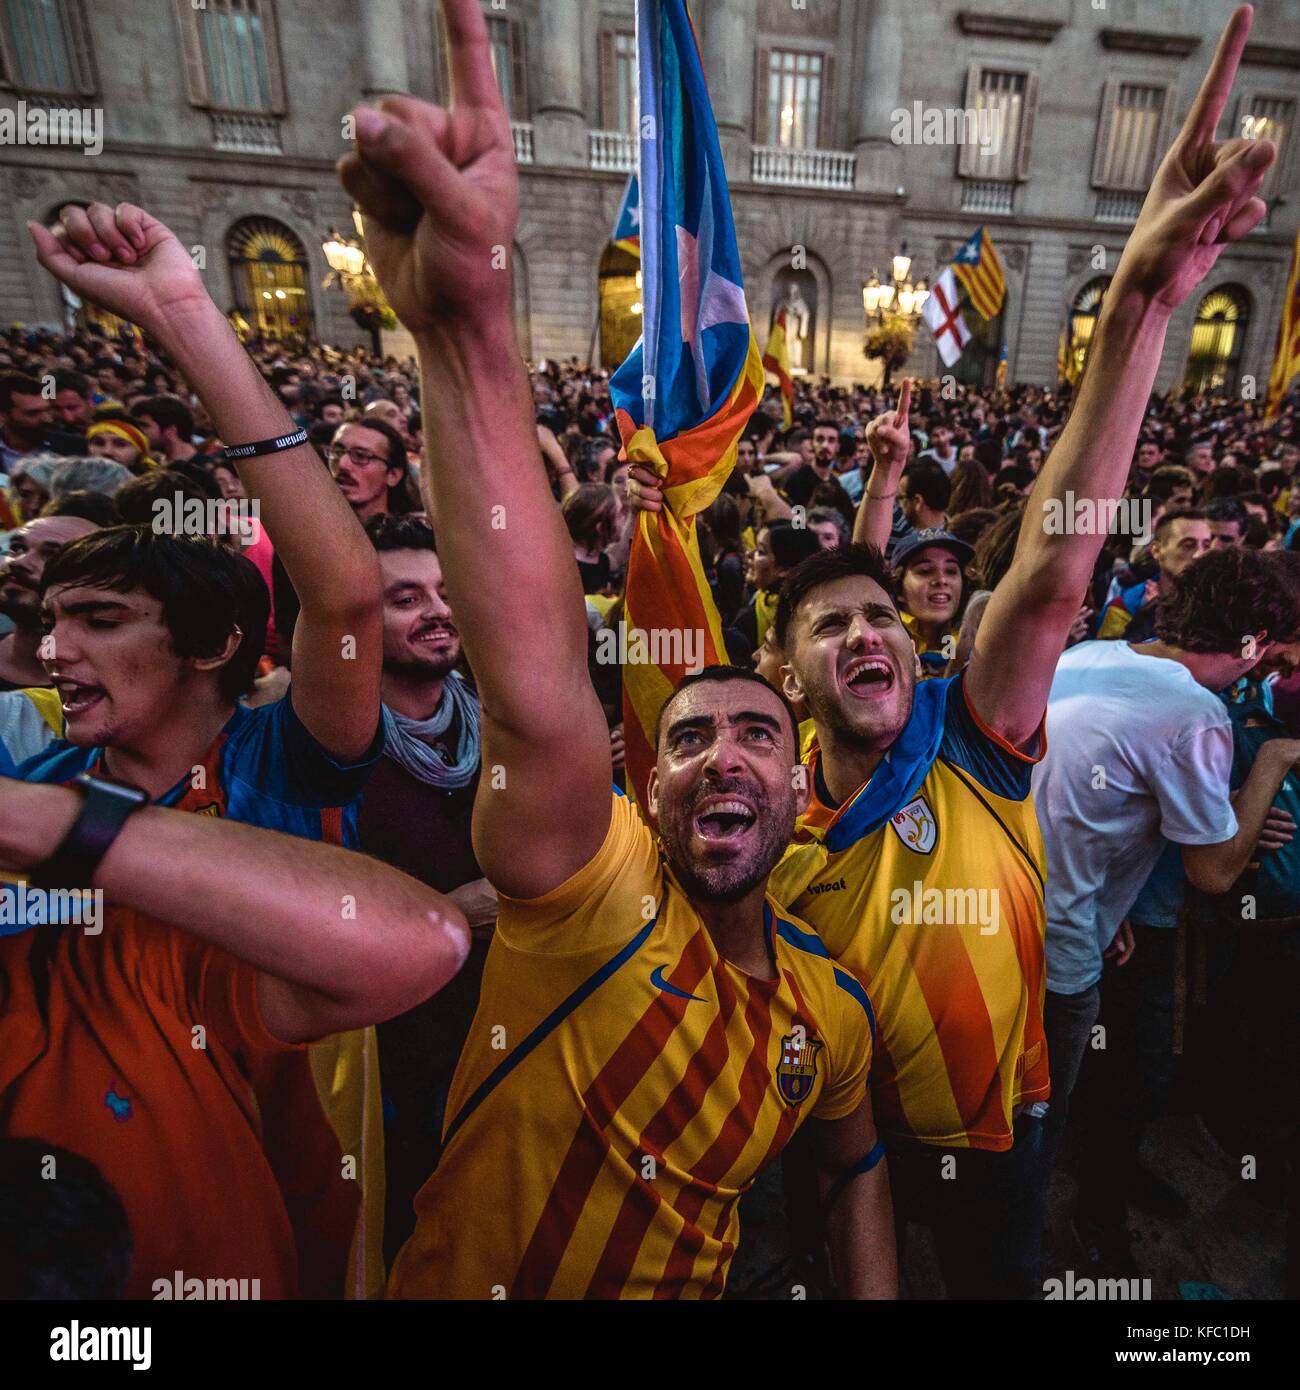 Barcelona, Spain. 27 October, 2017:  Catalan separatists shouts slogans against the Spanish flag as they celebrate the parliaments independence vote in front of the 'Generalitat' Credit: Matthias Oesterle/Alamy Live News Stock Photo